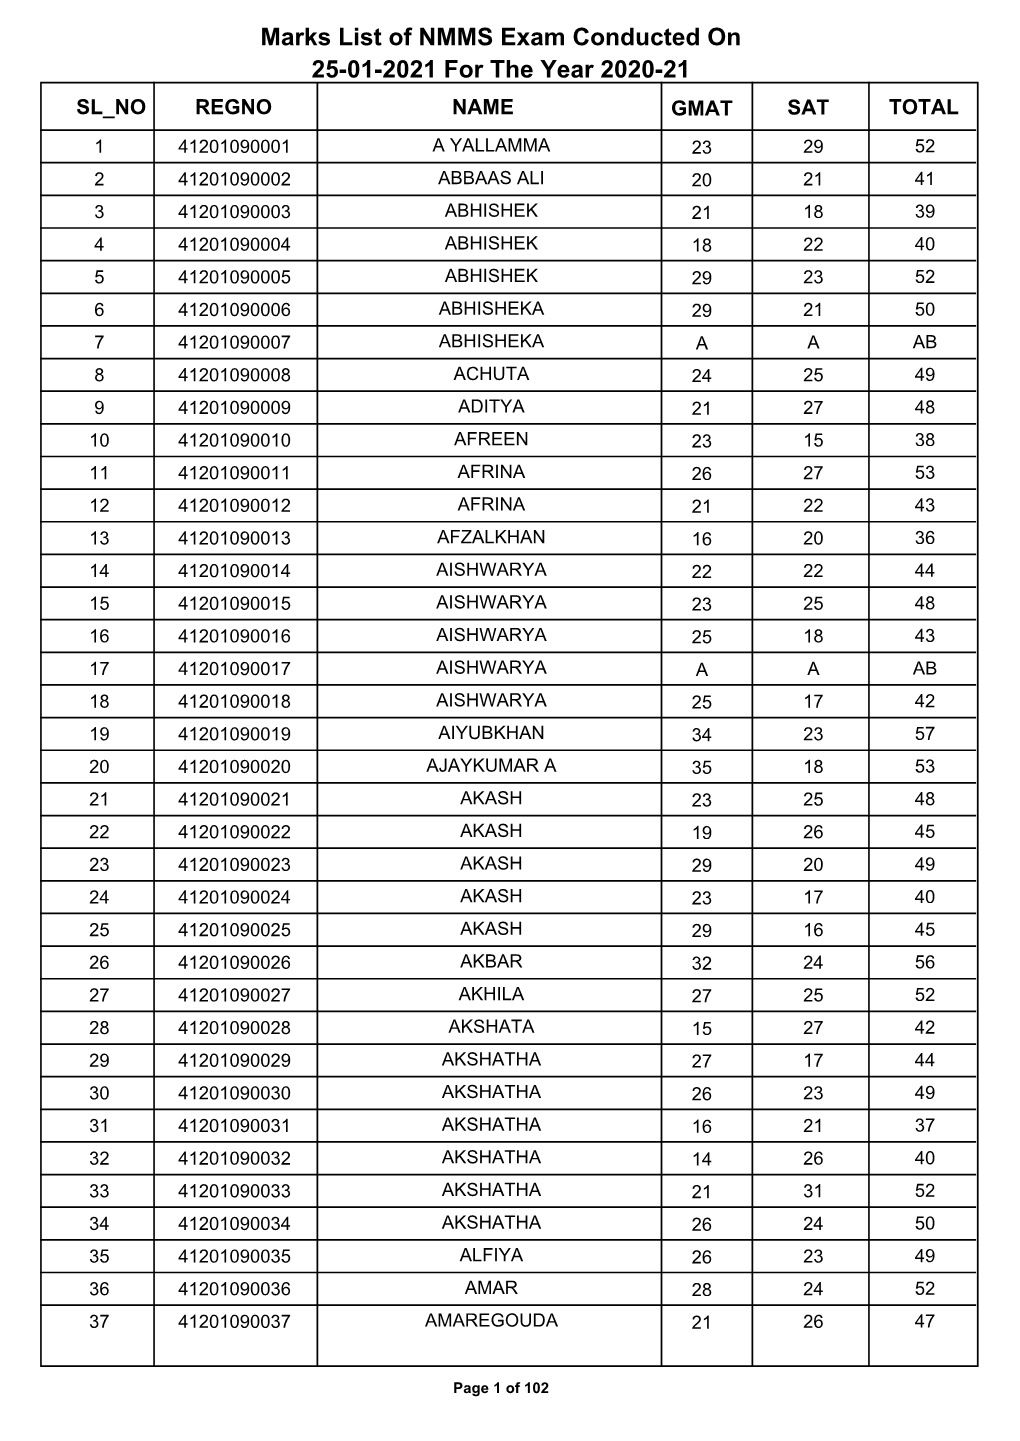 Marks List of NMMS Exam Conducted on 25-01-2021 for the Year 2020-21 SL NO REGNO NAME GMAT SAT TOTAL